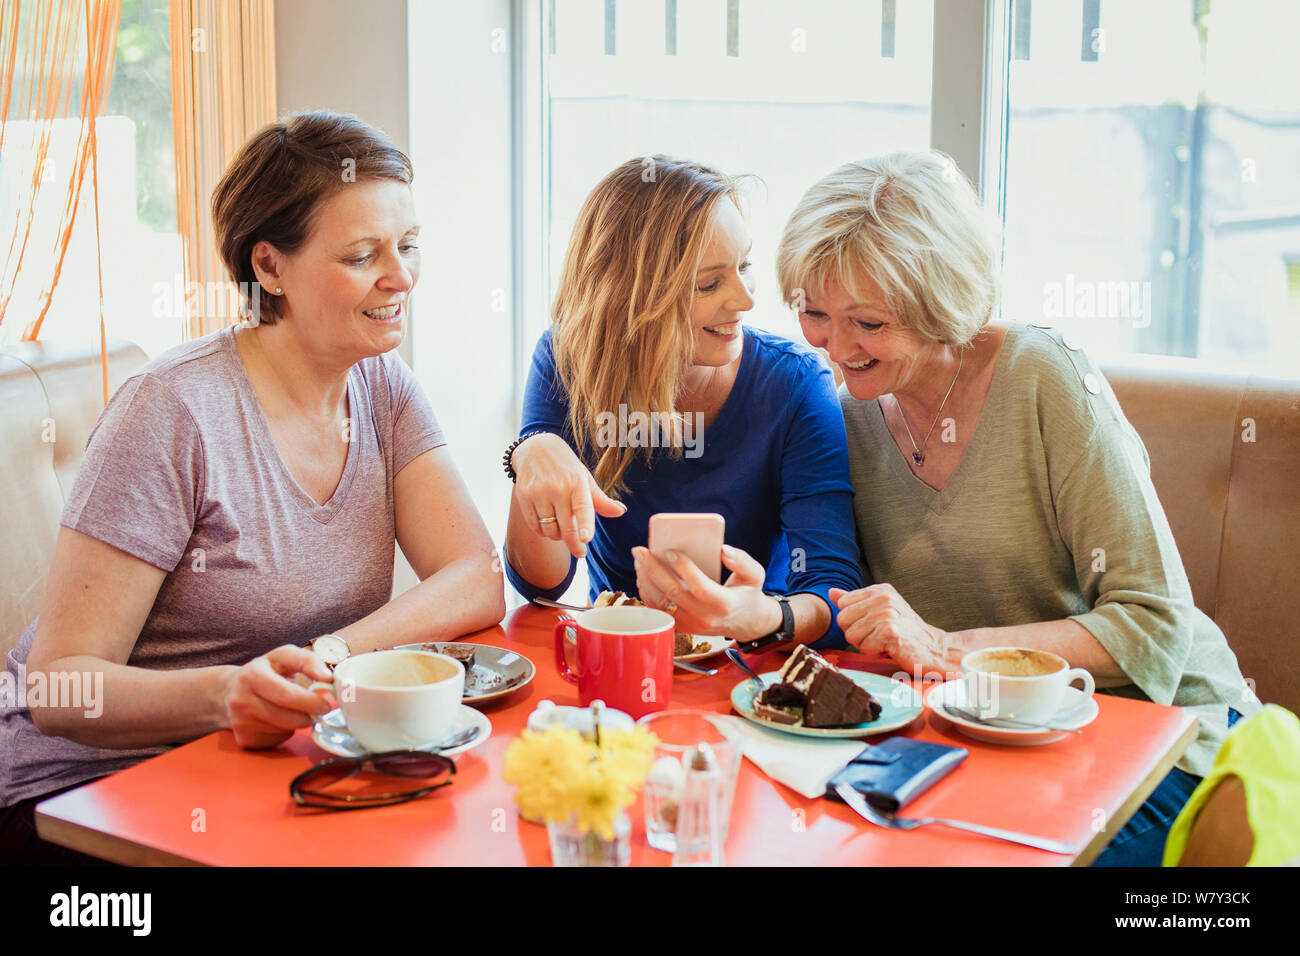 A group of three mature women having coffee and cake; they are looking at one of their phones. Stock Photo